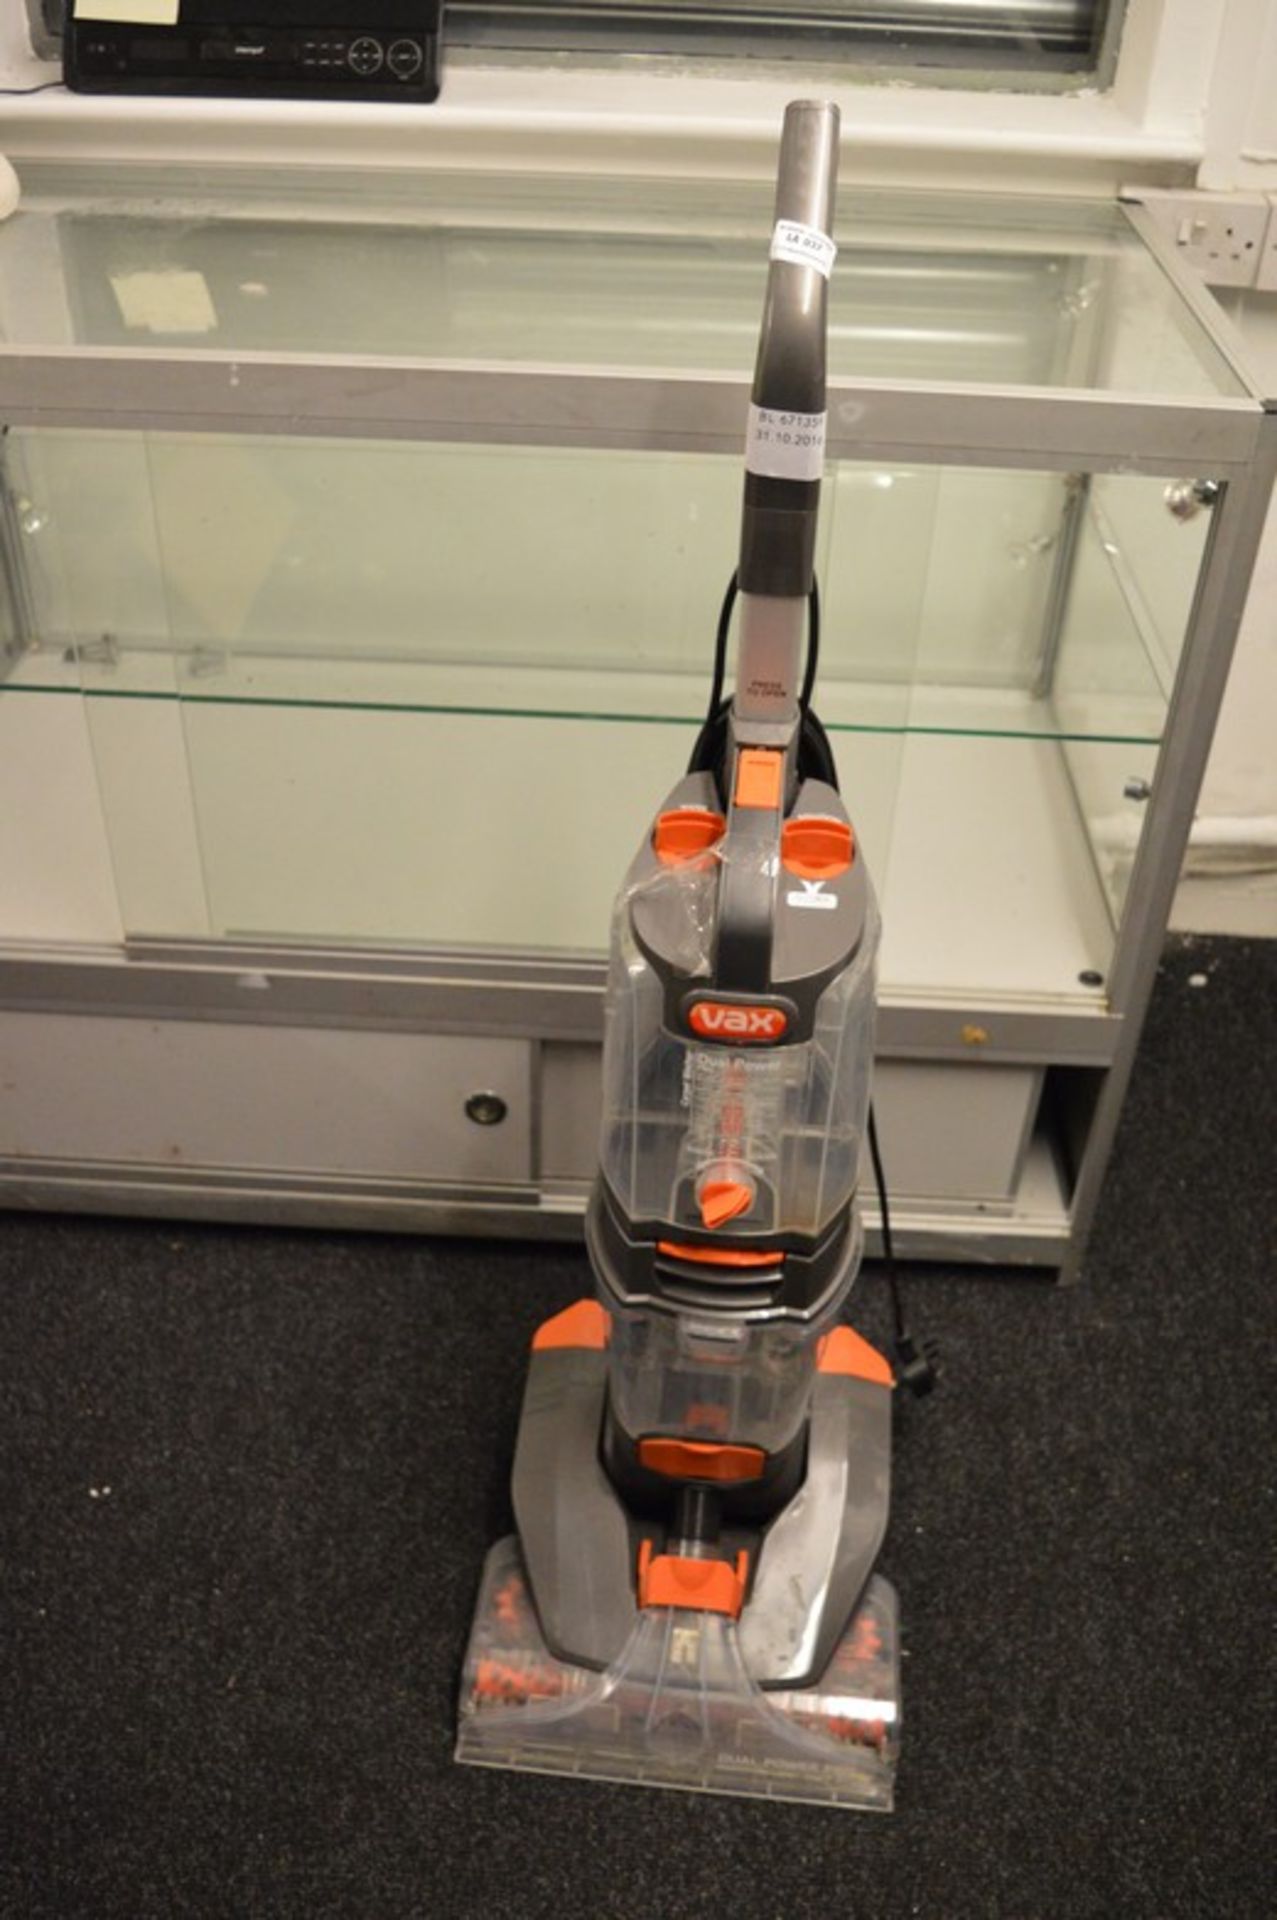 1 x VAX DUEL POWER PRO CARPET WASHER RRP £180 31.10.16 *PLEASE NOTE THAT THE BID PRICE IS MULTIPLIED